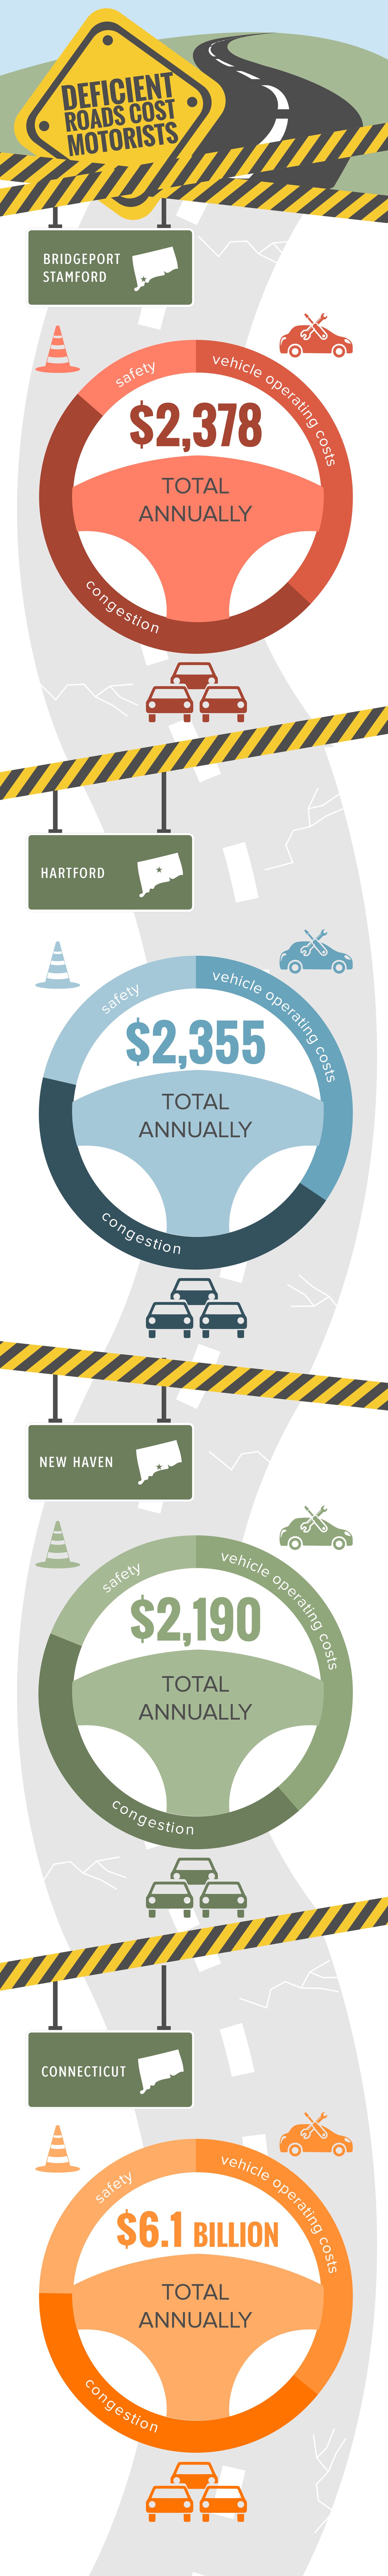 Connecticut Deficient Roads Infographic By Locality